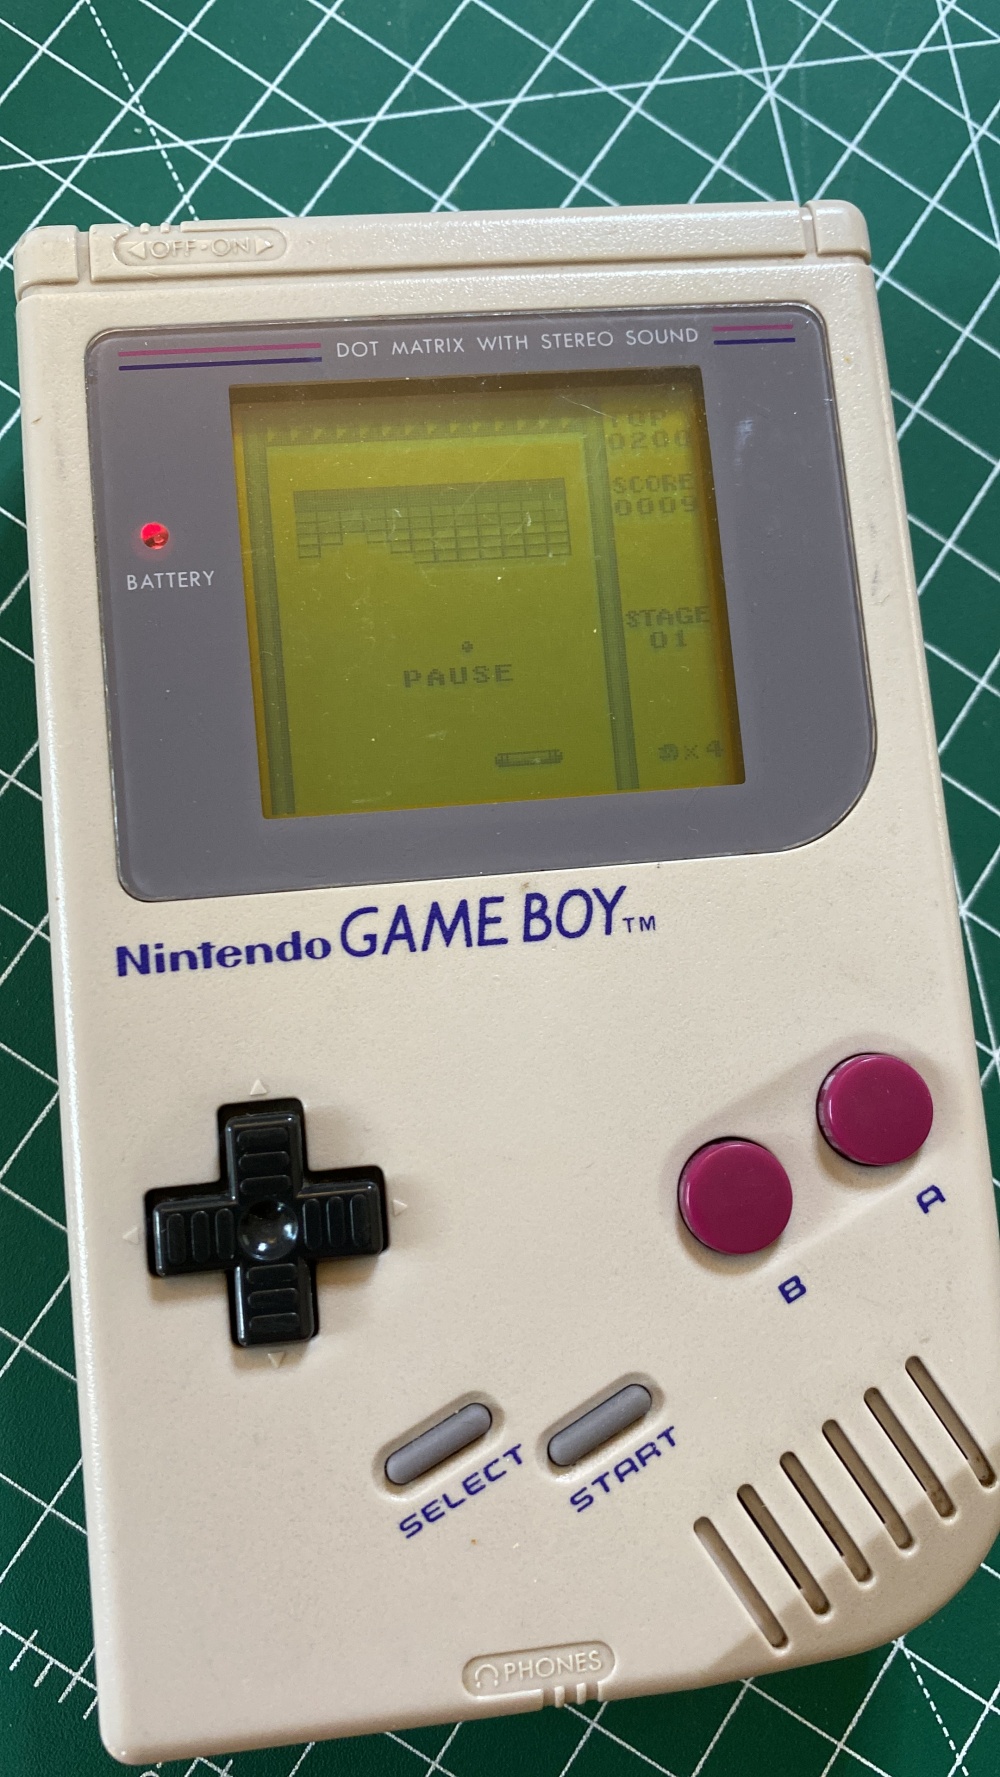 GameBoy with the fixed display